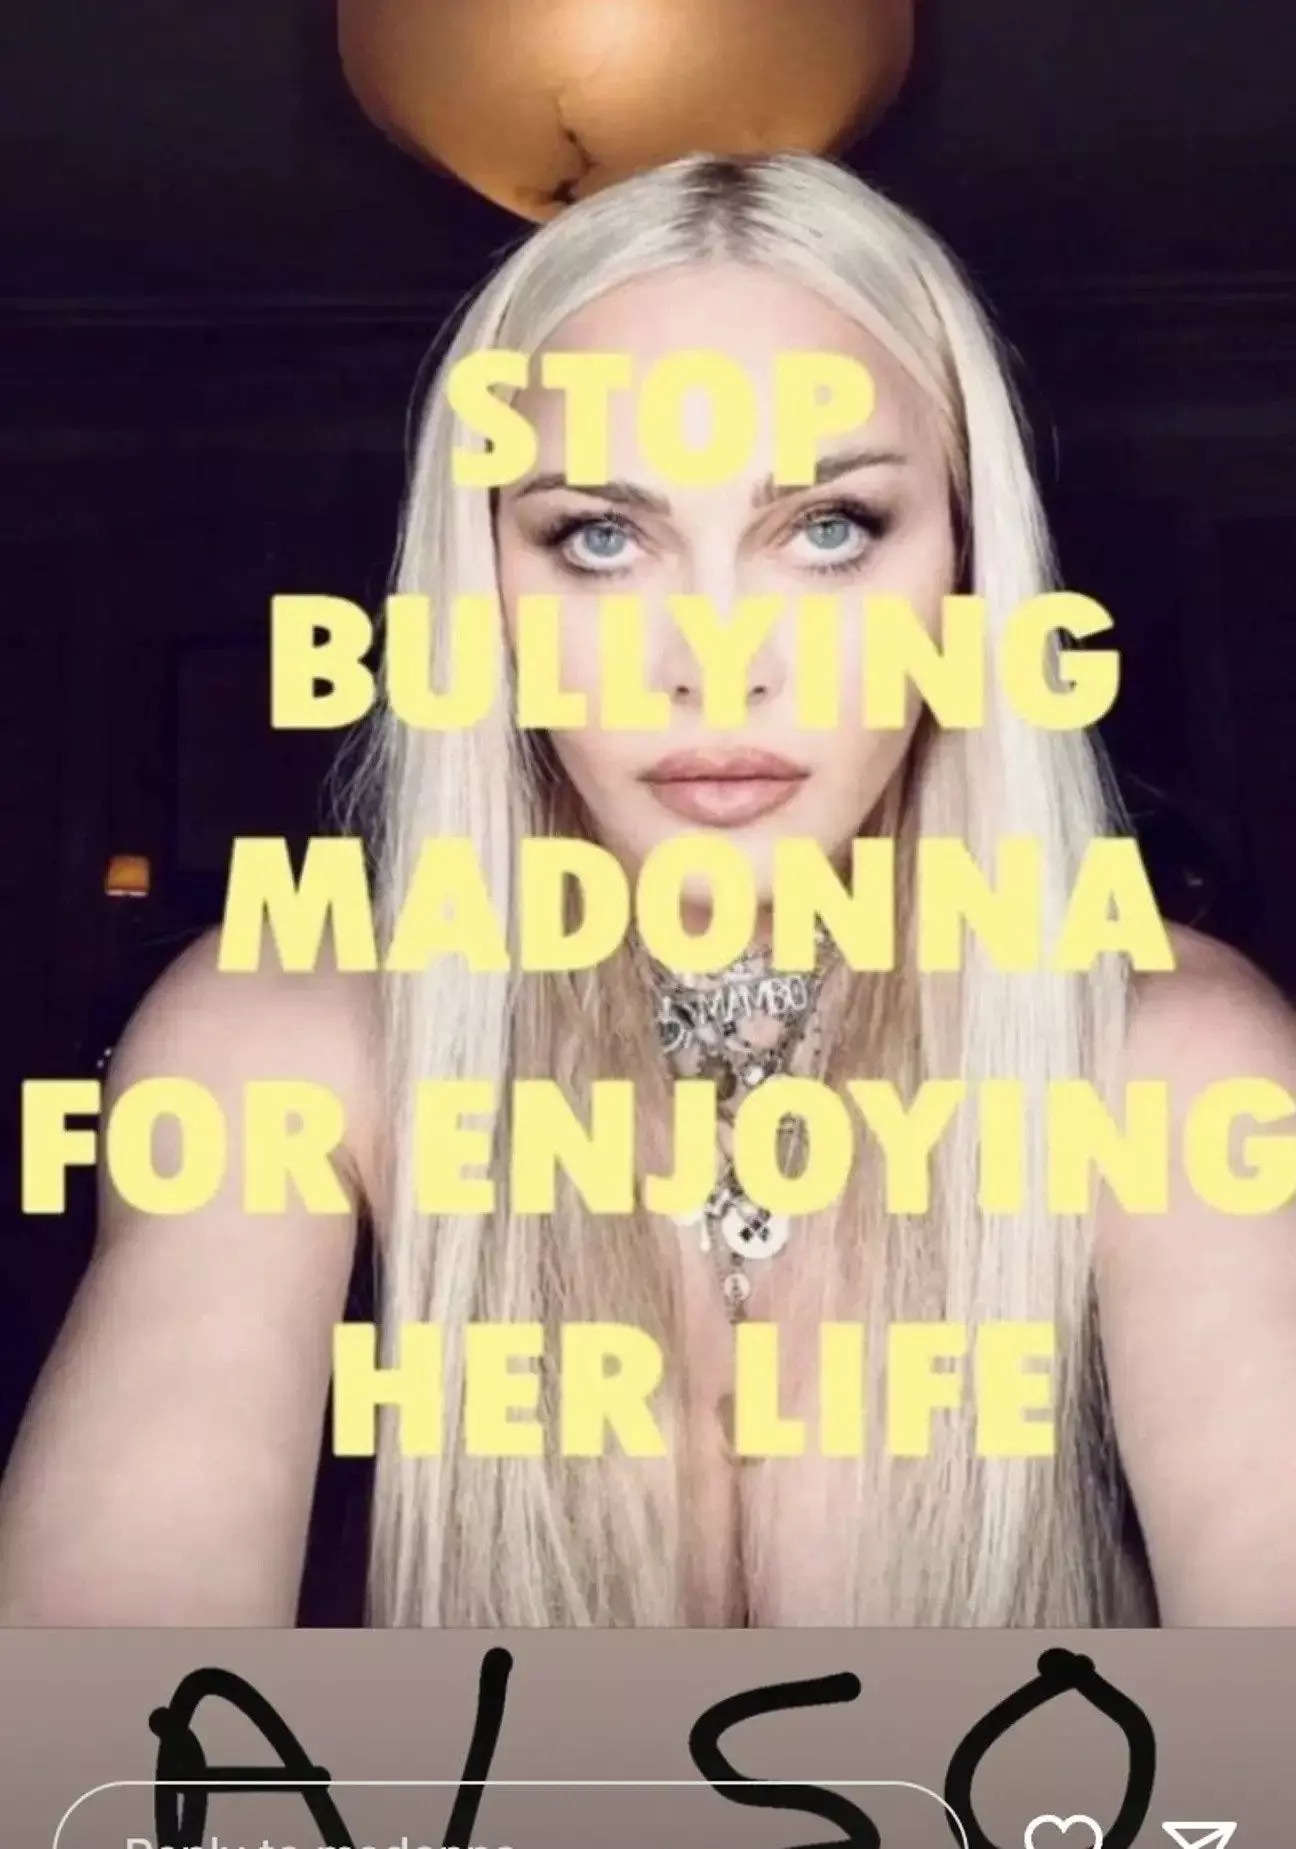 Madonna with "Stop Bullying" text over her face